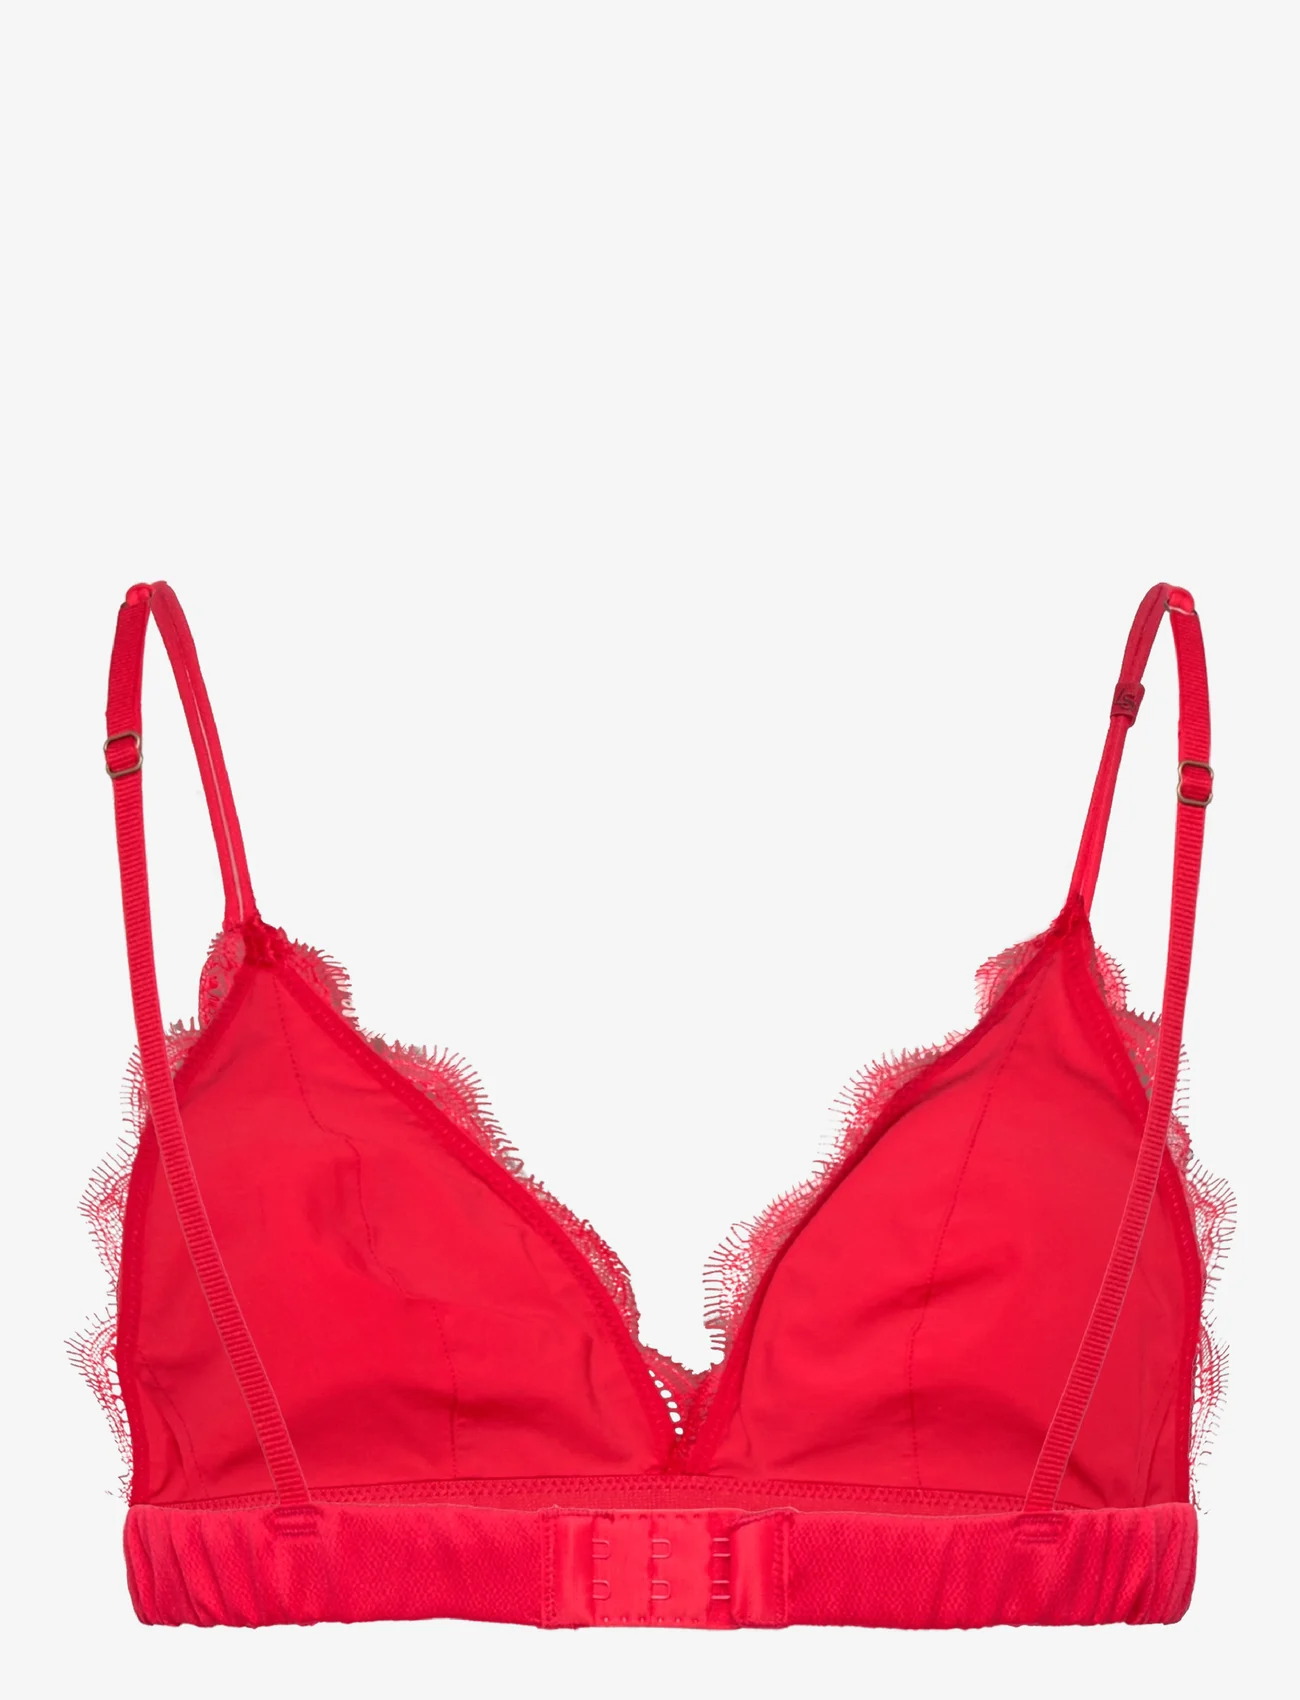 Love Stories - Love Lace - rinnahoidja - 400-red - 1